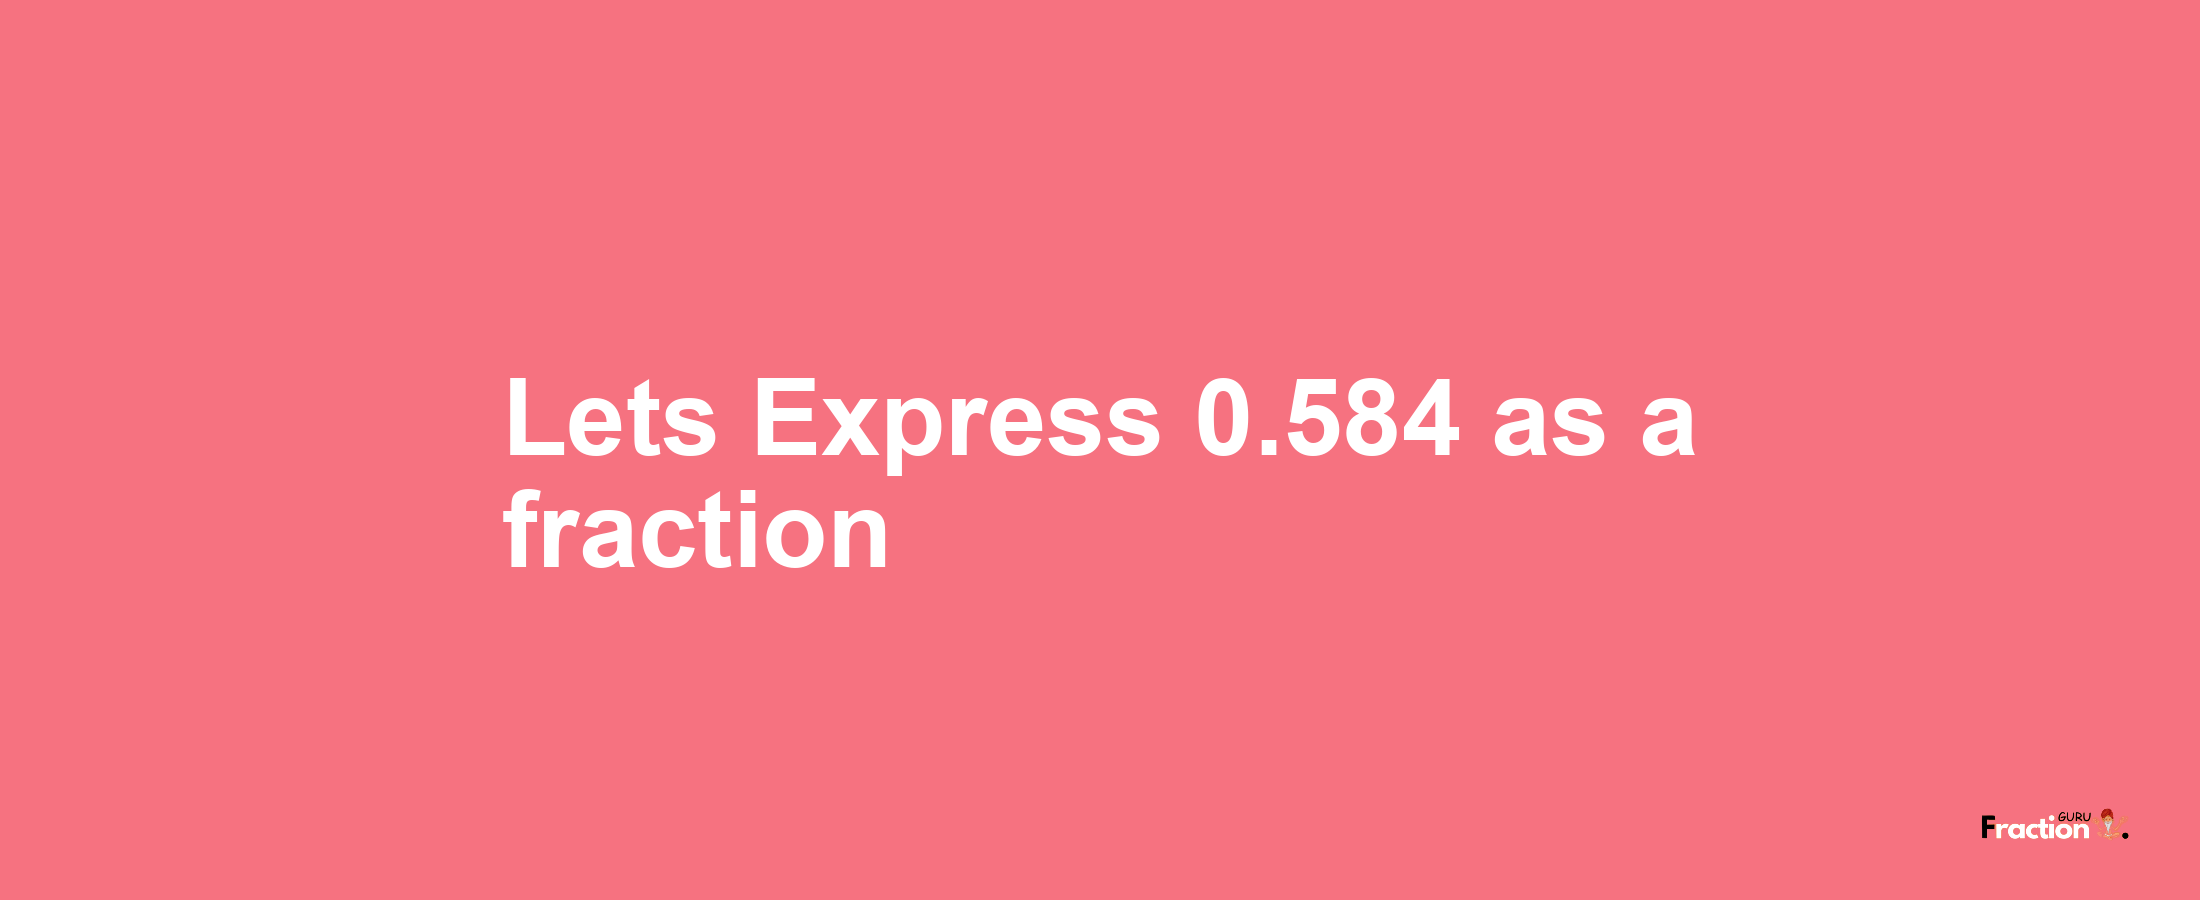 Lets Express 0.584 as afraction